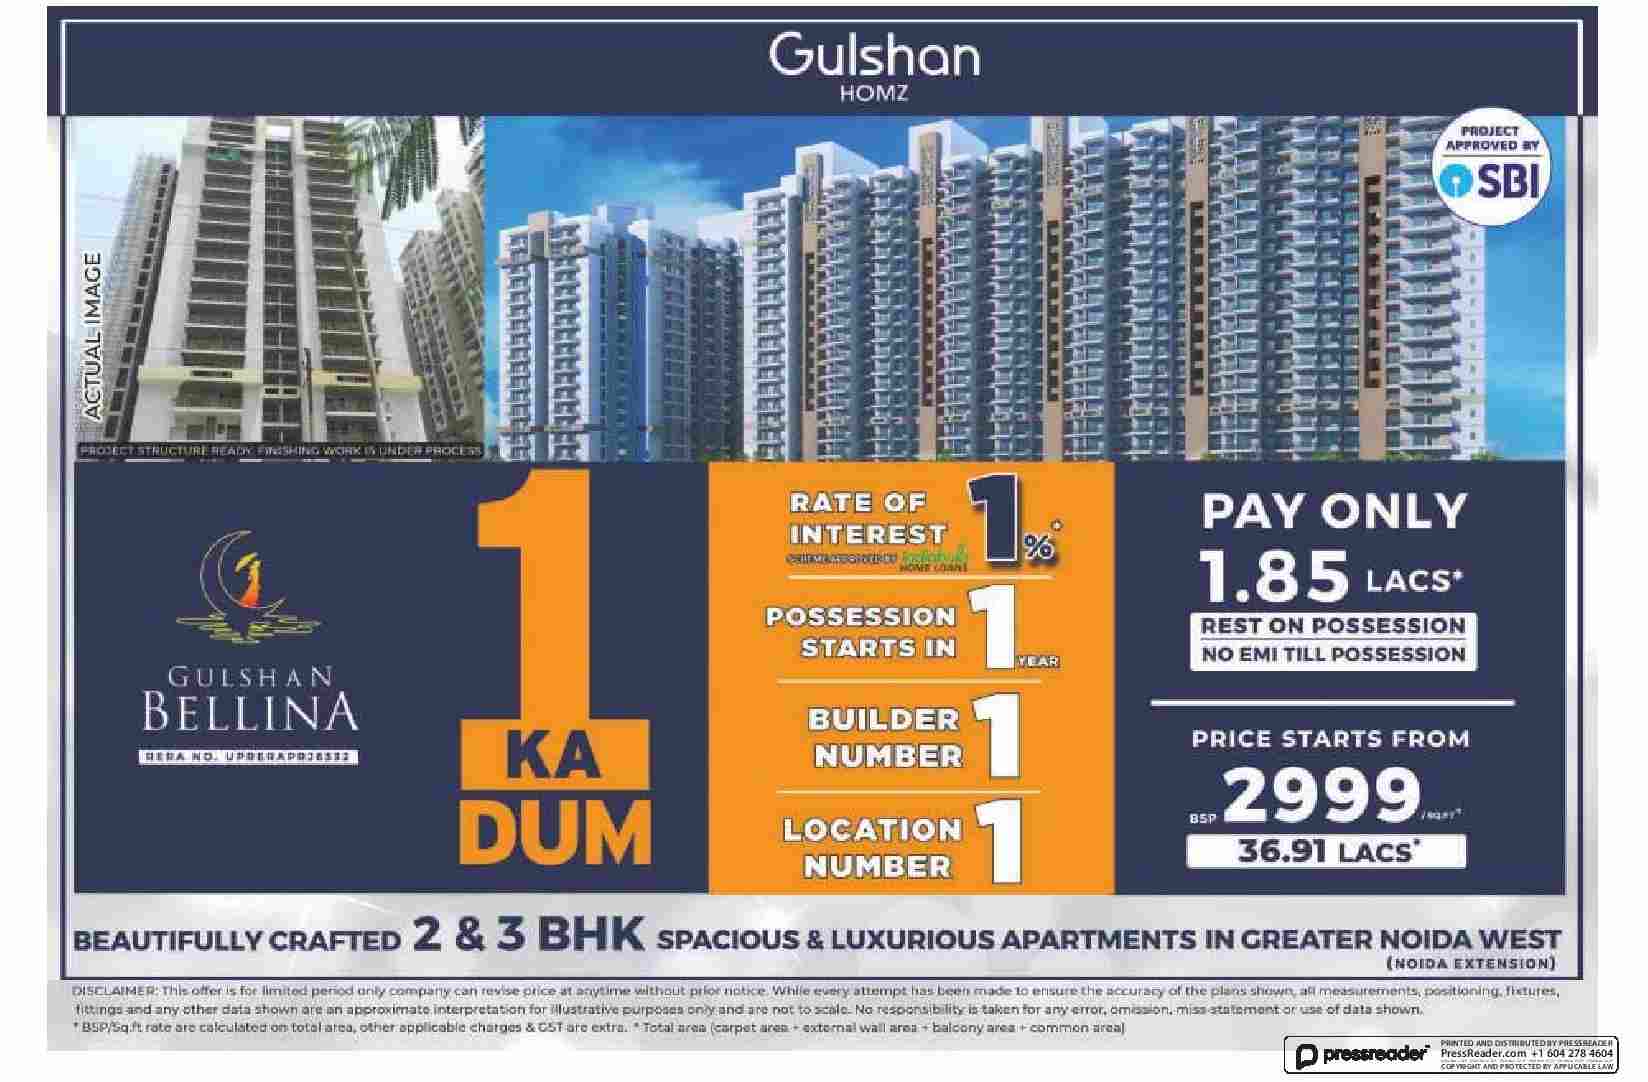 Pay only Rs. 1.85 Lacs and rest on possession at Gulshan Bellina in Greater Noida Update